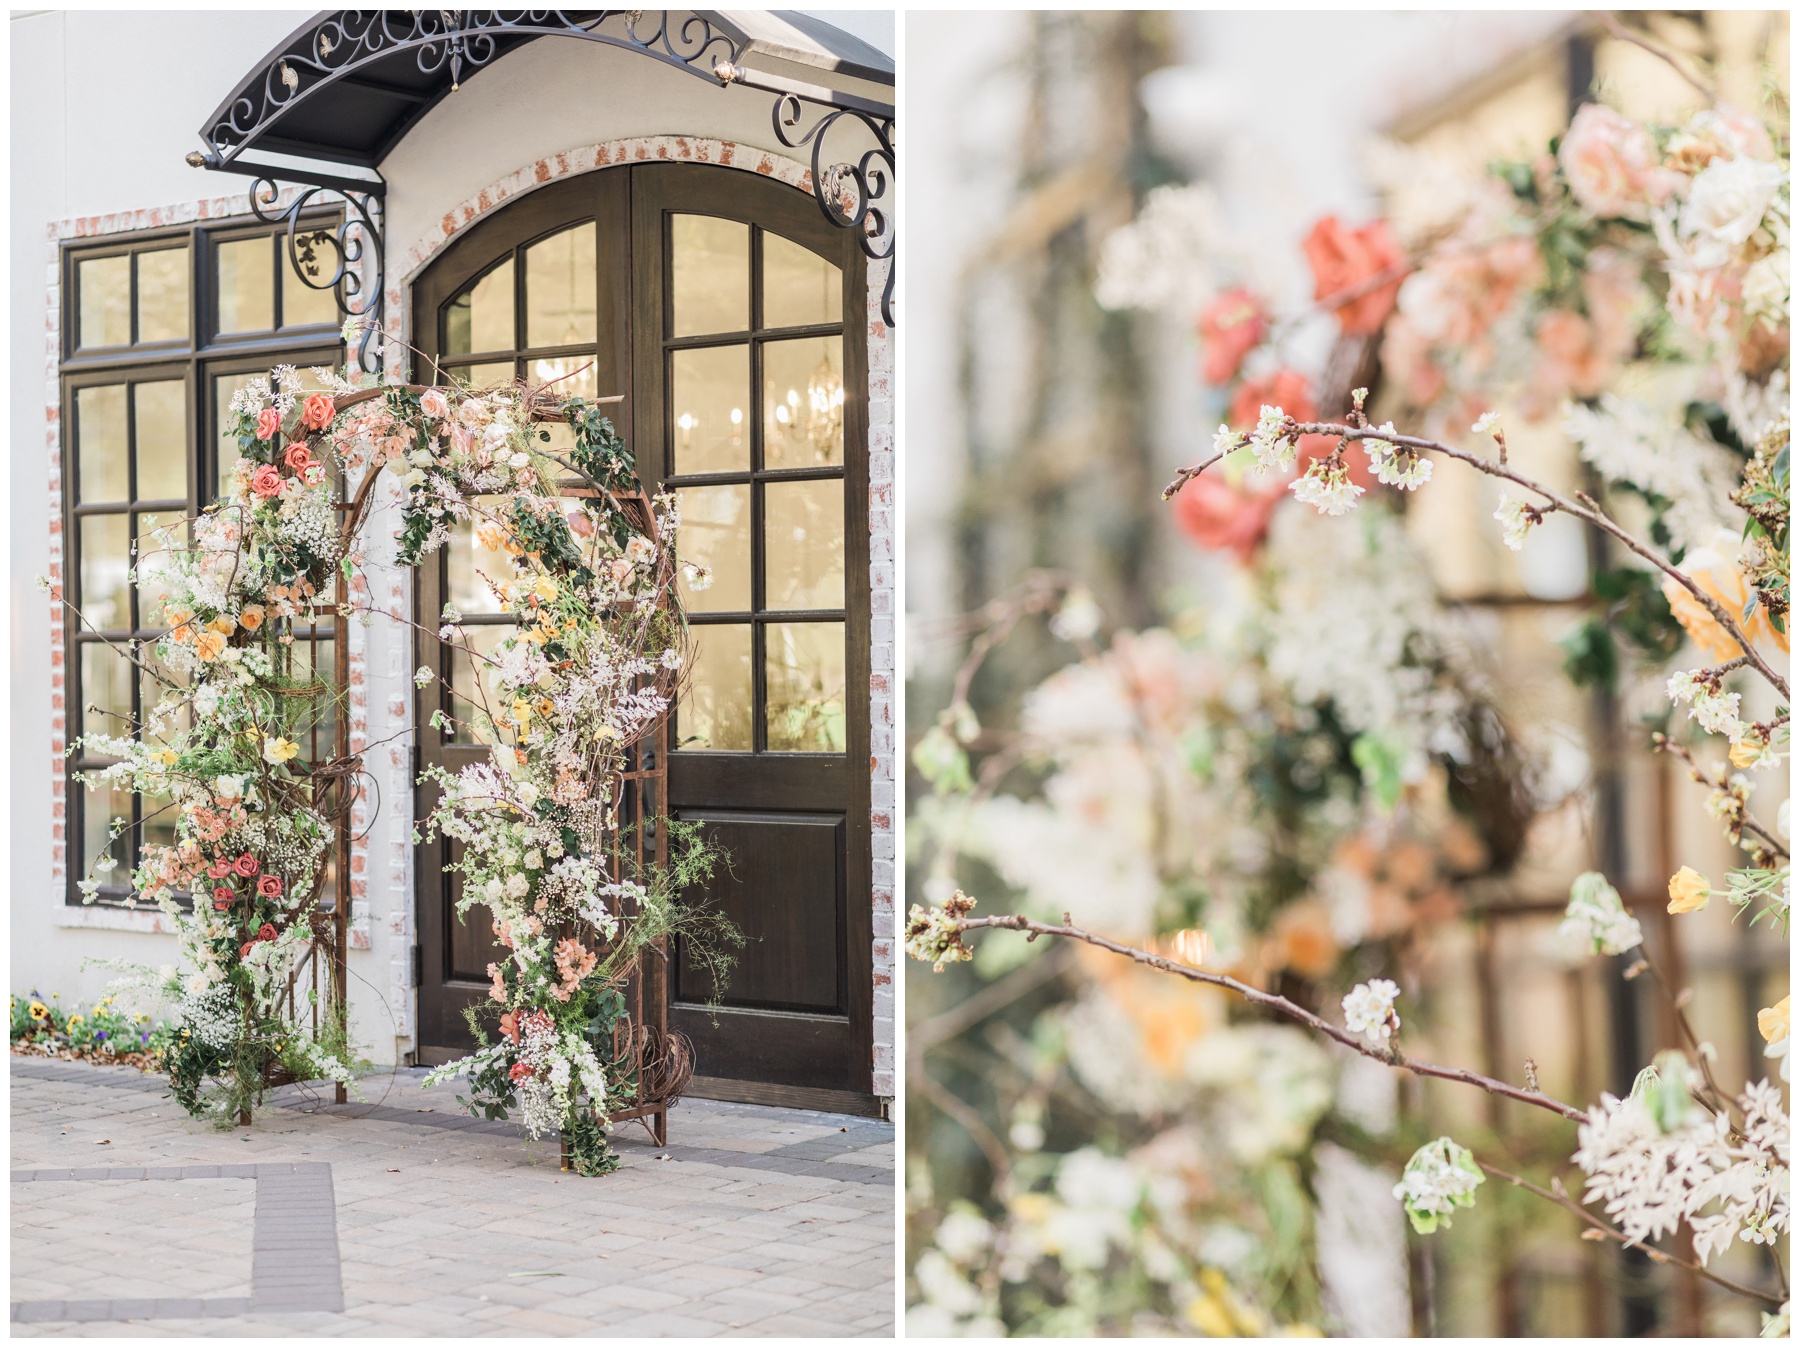 Wooden trellis arch covered with pink and peach roses and baby's breath for a spring wedding